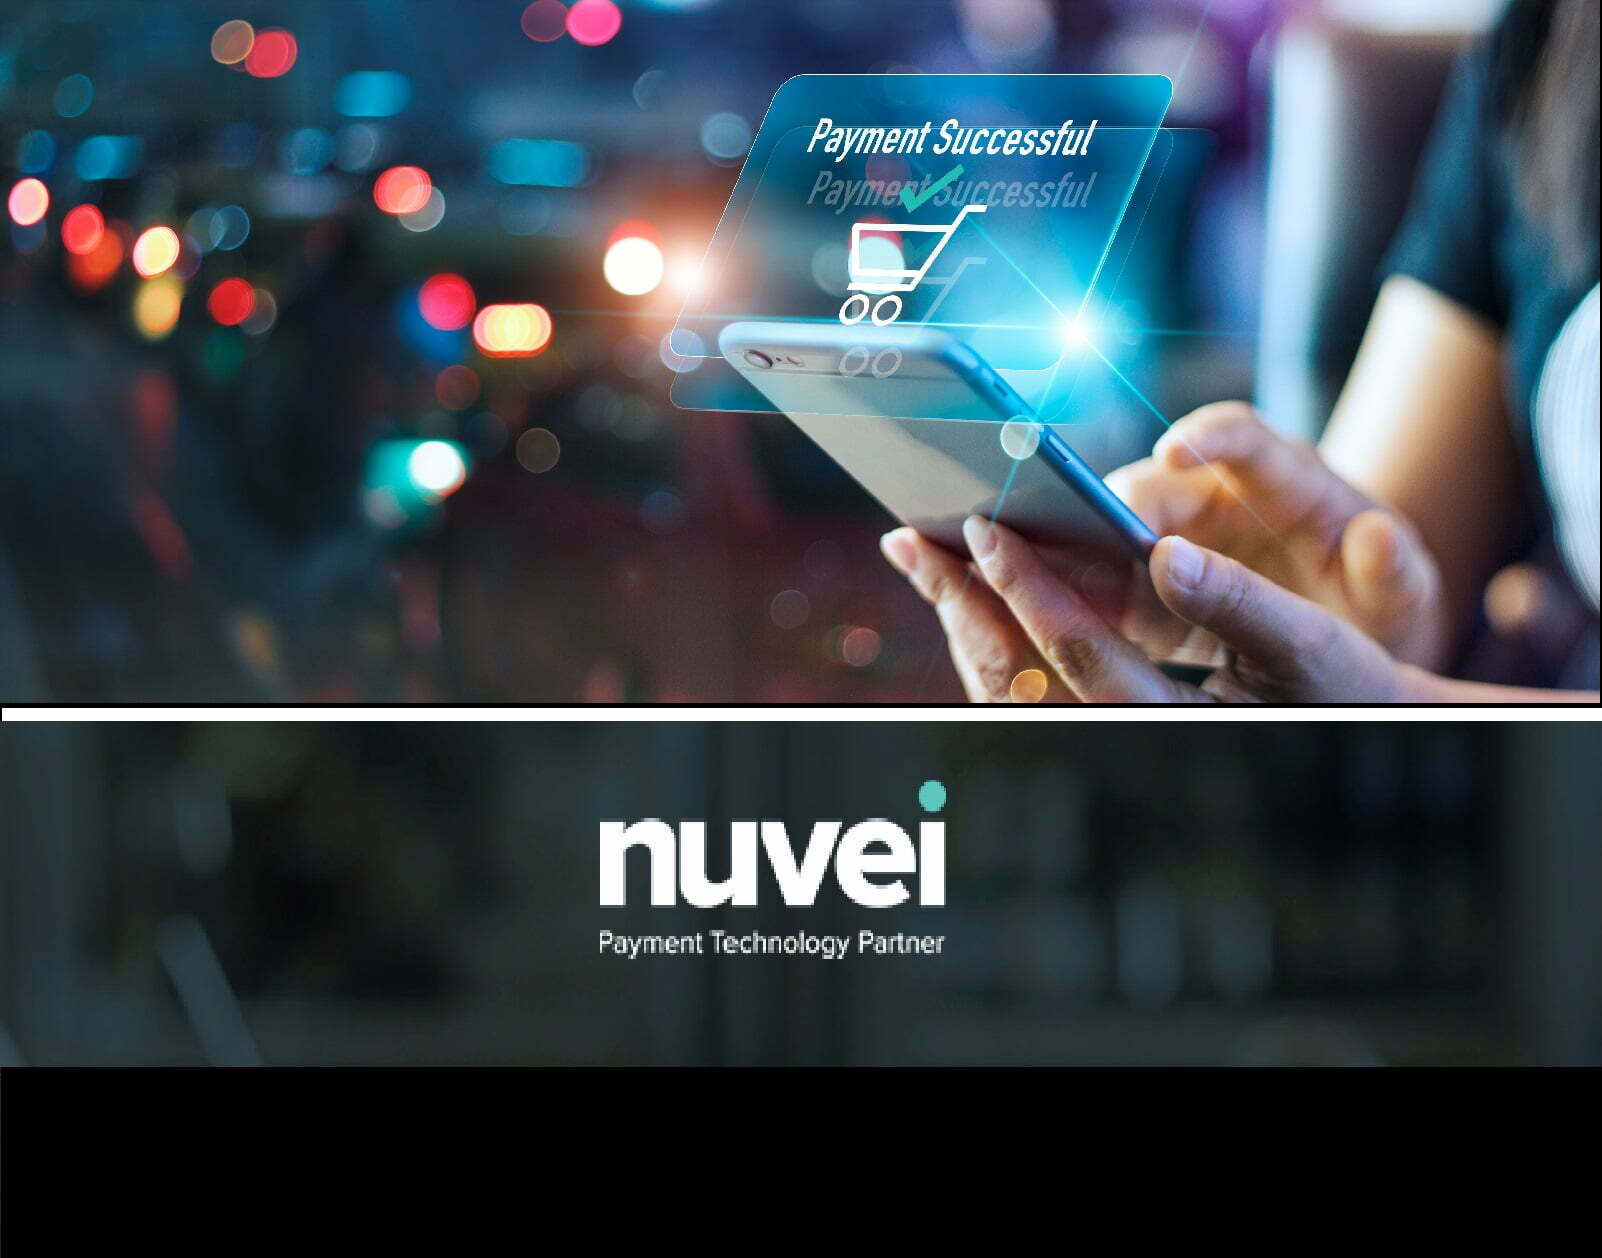 nuvei payment technology partner